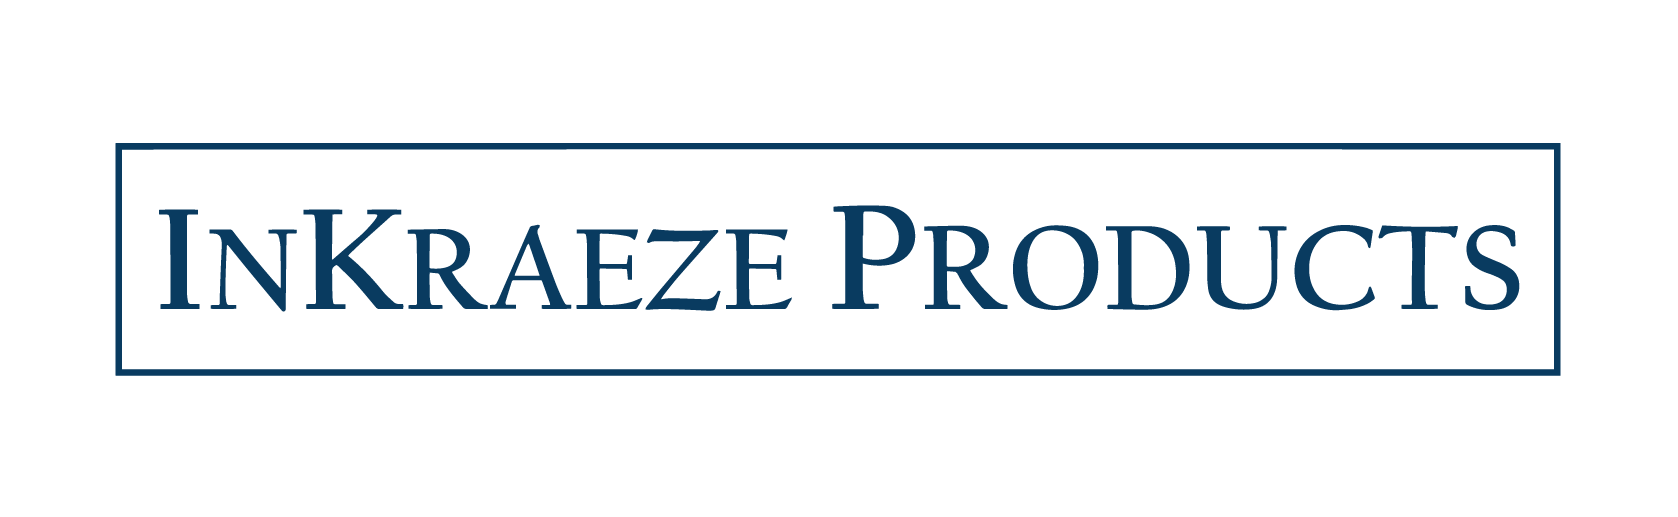 InKraeze Products logo in navy text inside of a rectangle over a white background.